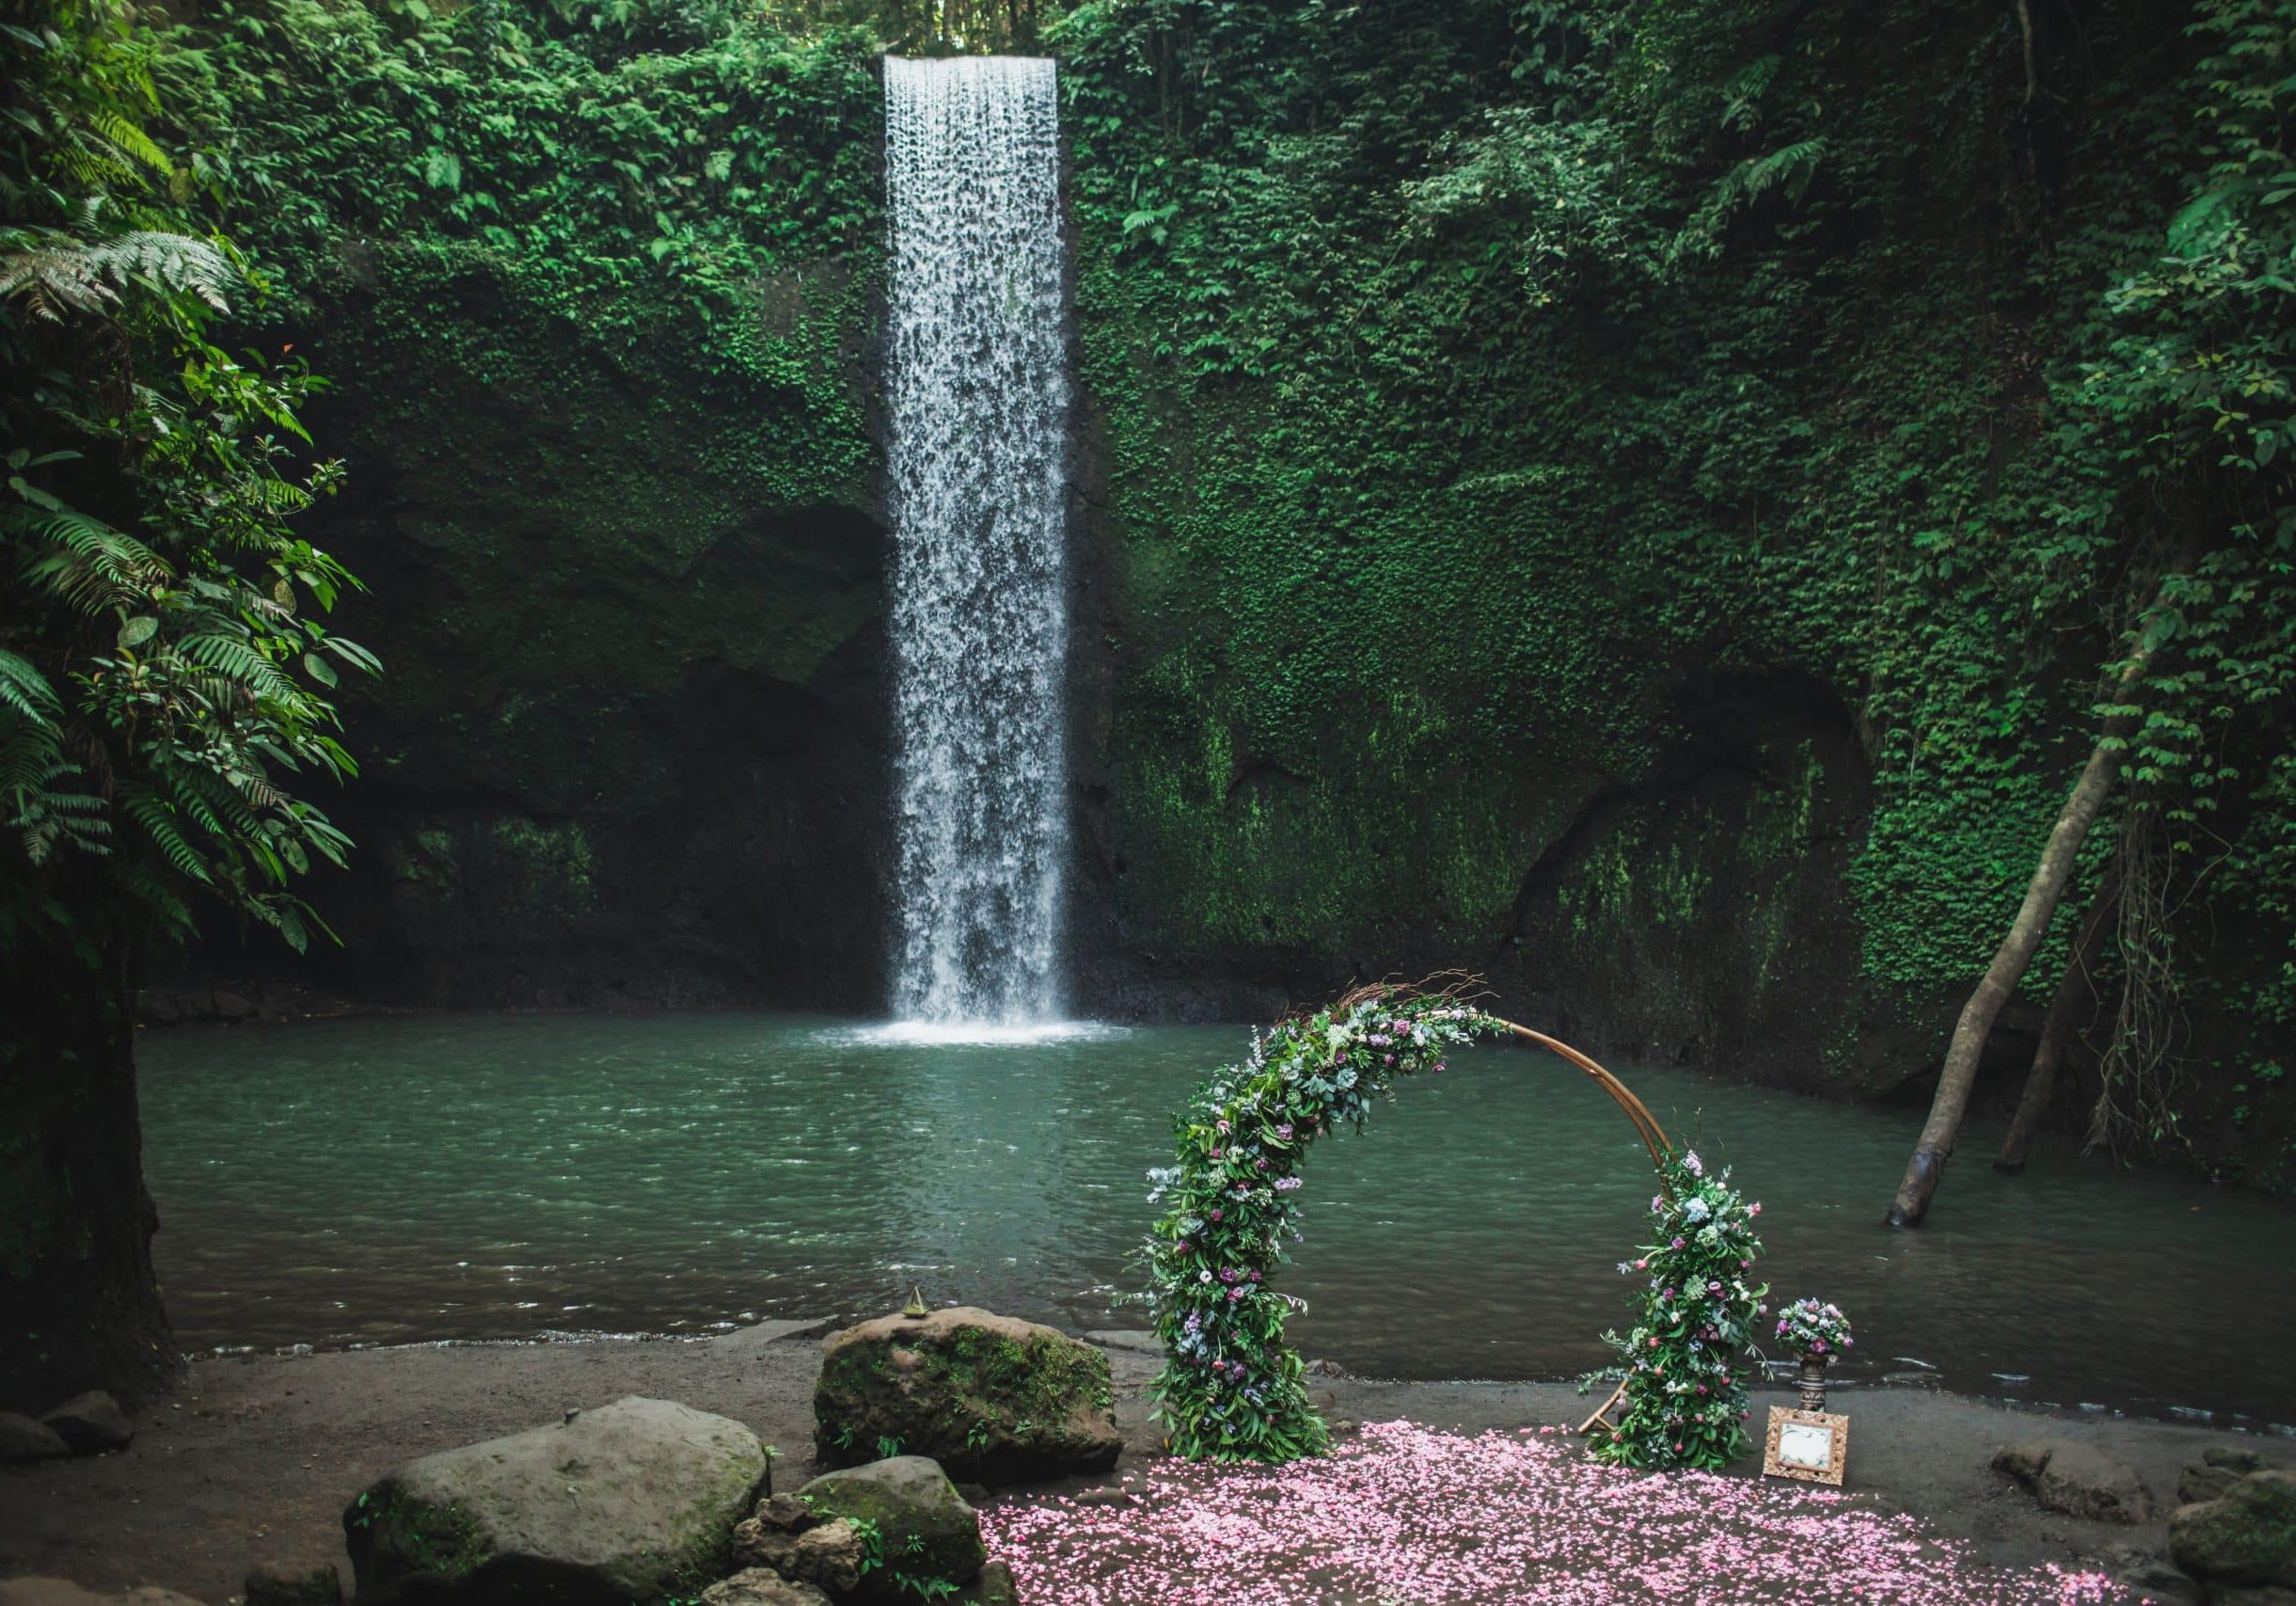 Round bronze wedding arch decorated with pink roses and greens. Unusual location for ceremony near small waterfall in jungle. Tibumana, Bali, Ubud.